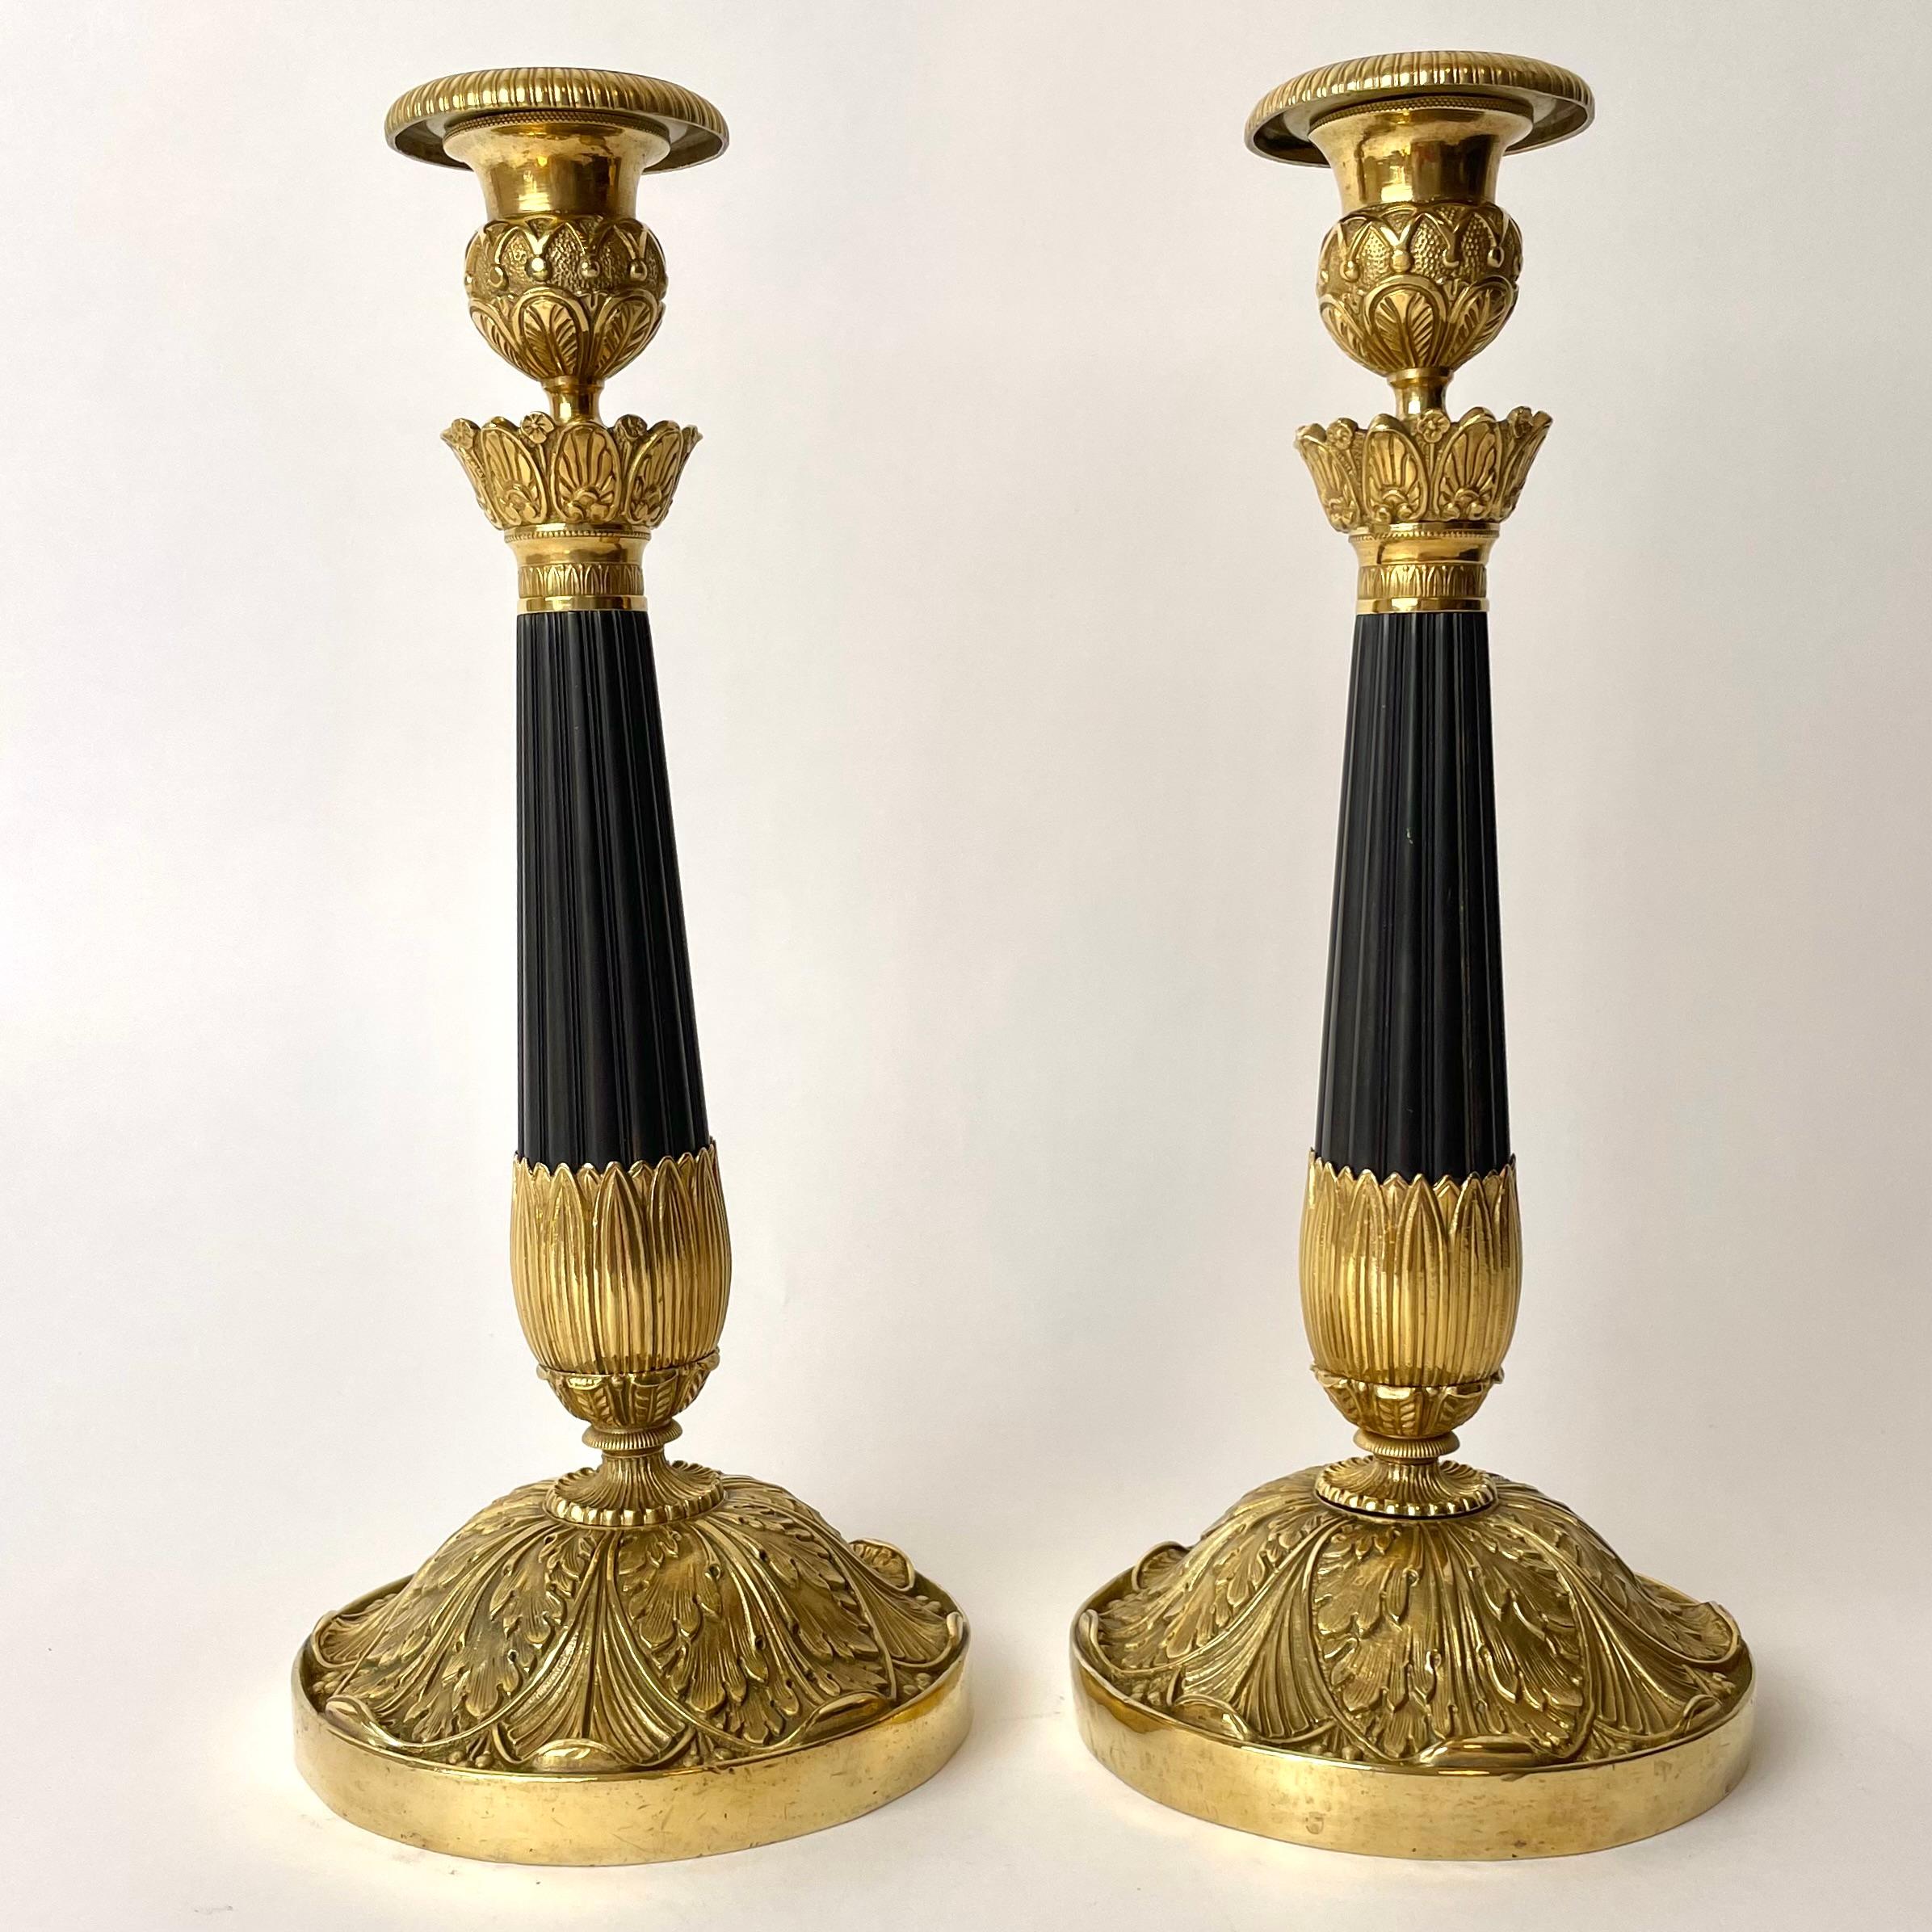 A Beautiful Pair of Empire Candlesticks, Gilded and Patinated Bronze. 

Richly ornamented base with flowing leaf-pattern. Dark patinated fluted column which then continues into a gilded bulb, which serves as a base for the cup. Made in France,